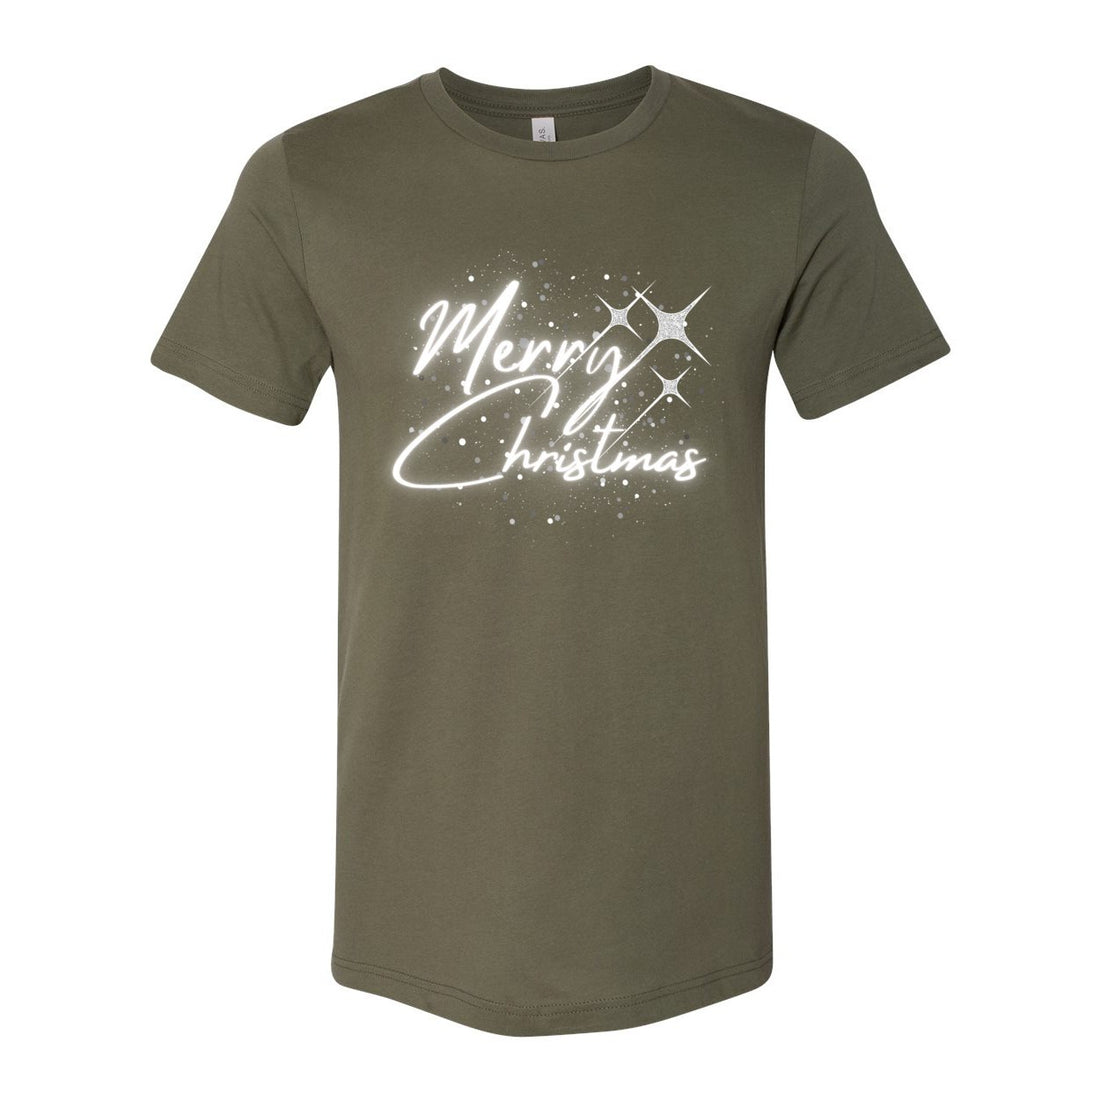 Merry White Christmas - T-Shirts - Positively Sassy - Merry White Christmas